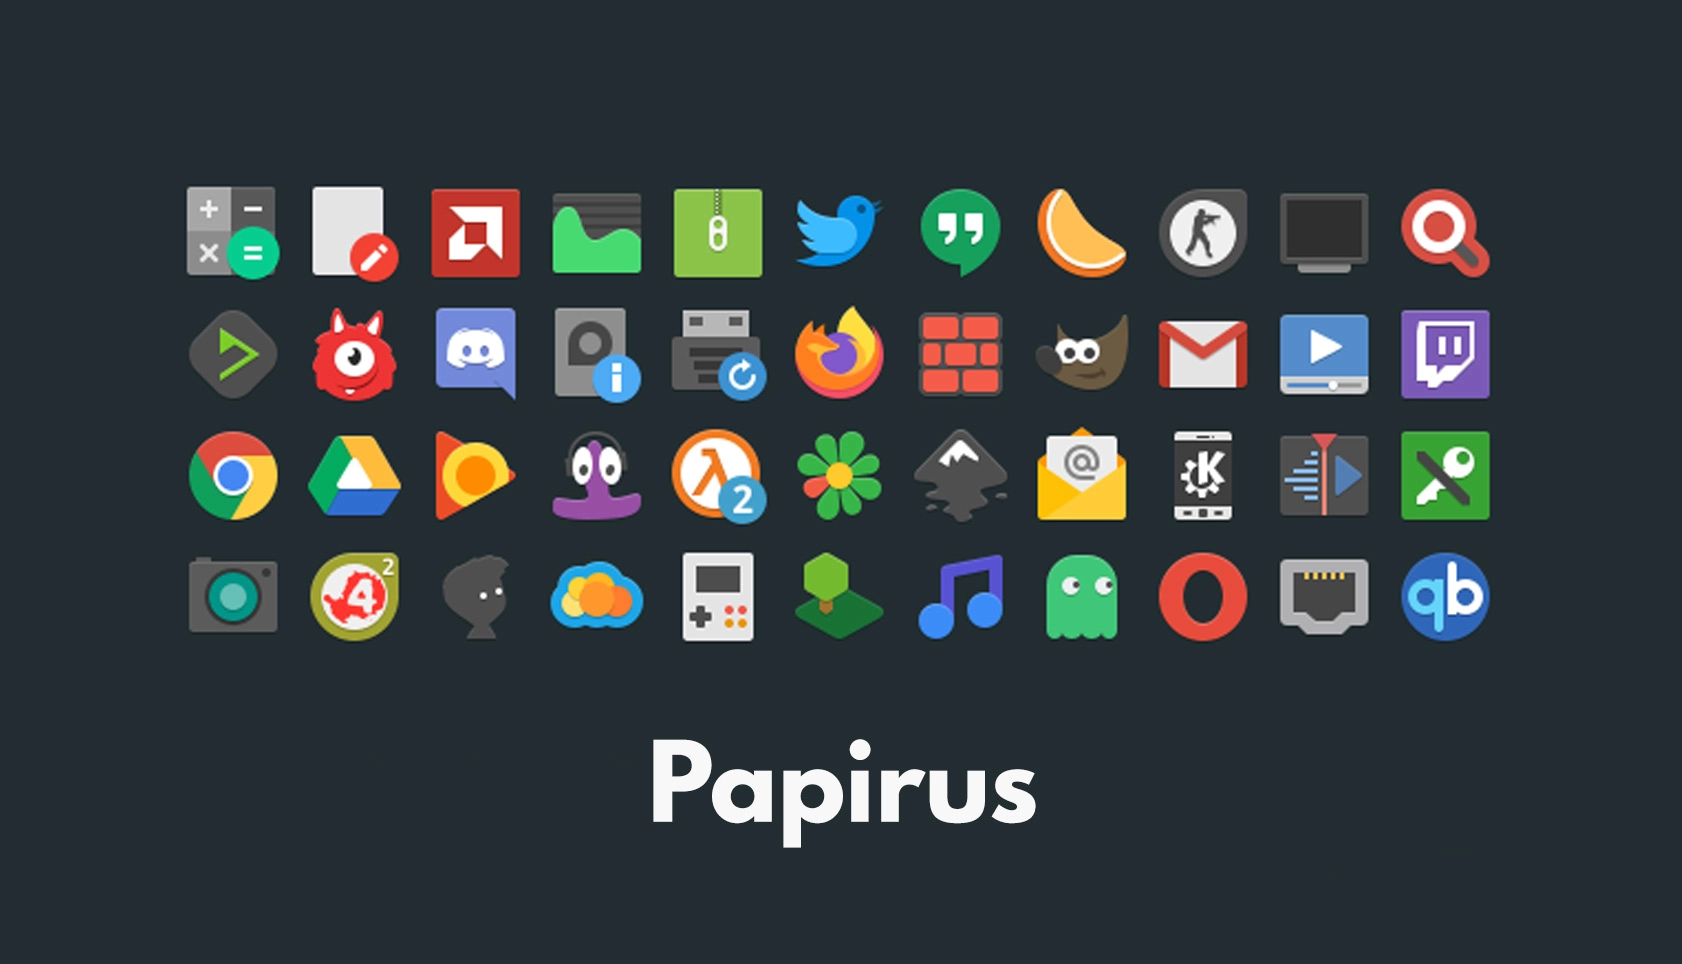 New Update in Papirus Icon Pack Adds Over 50 Icons